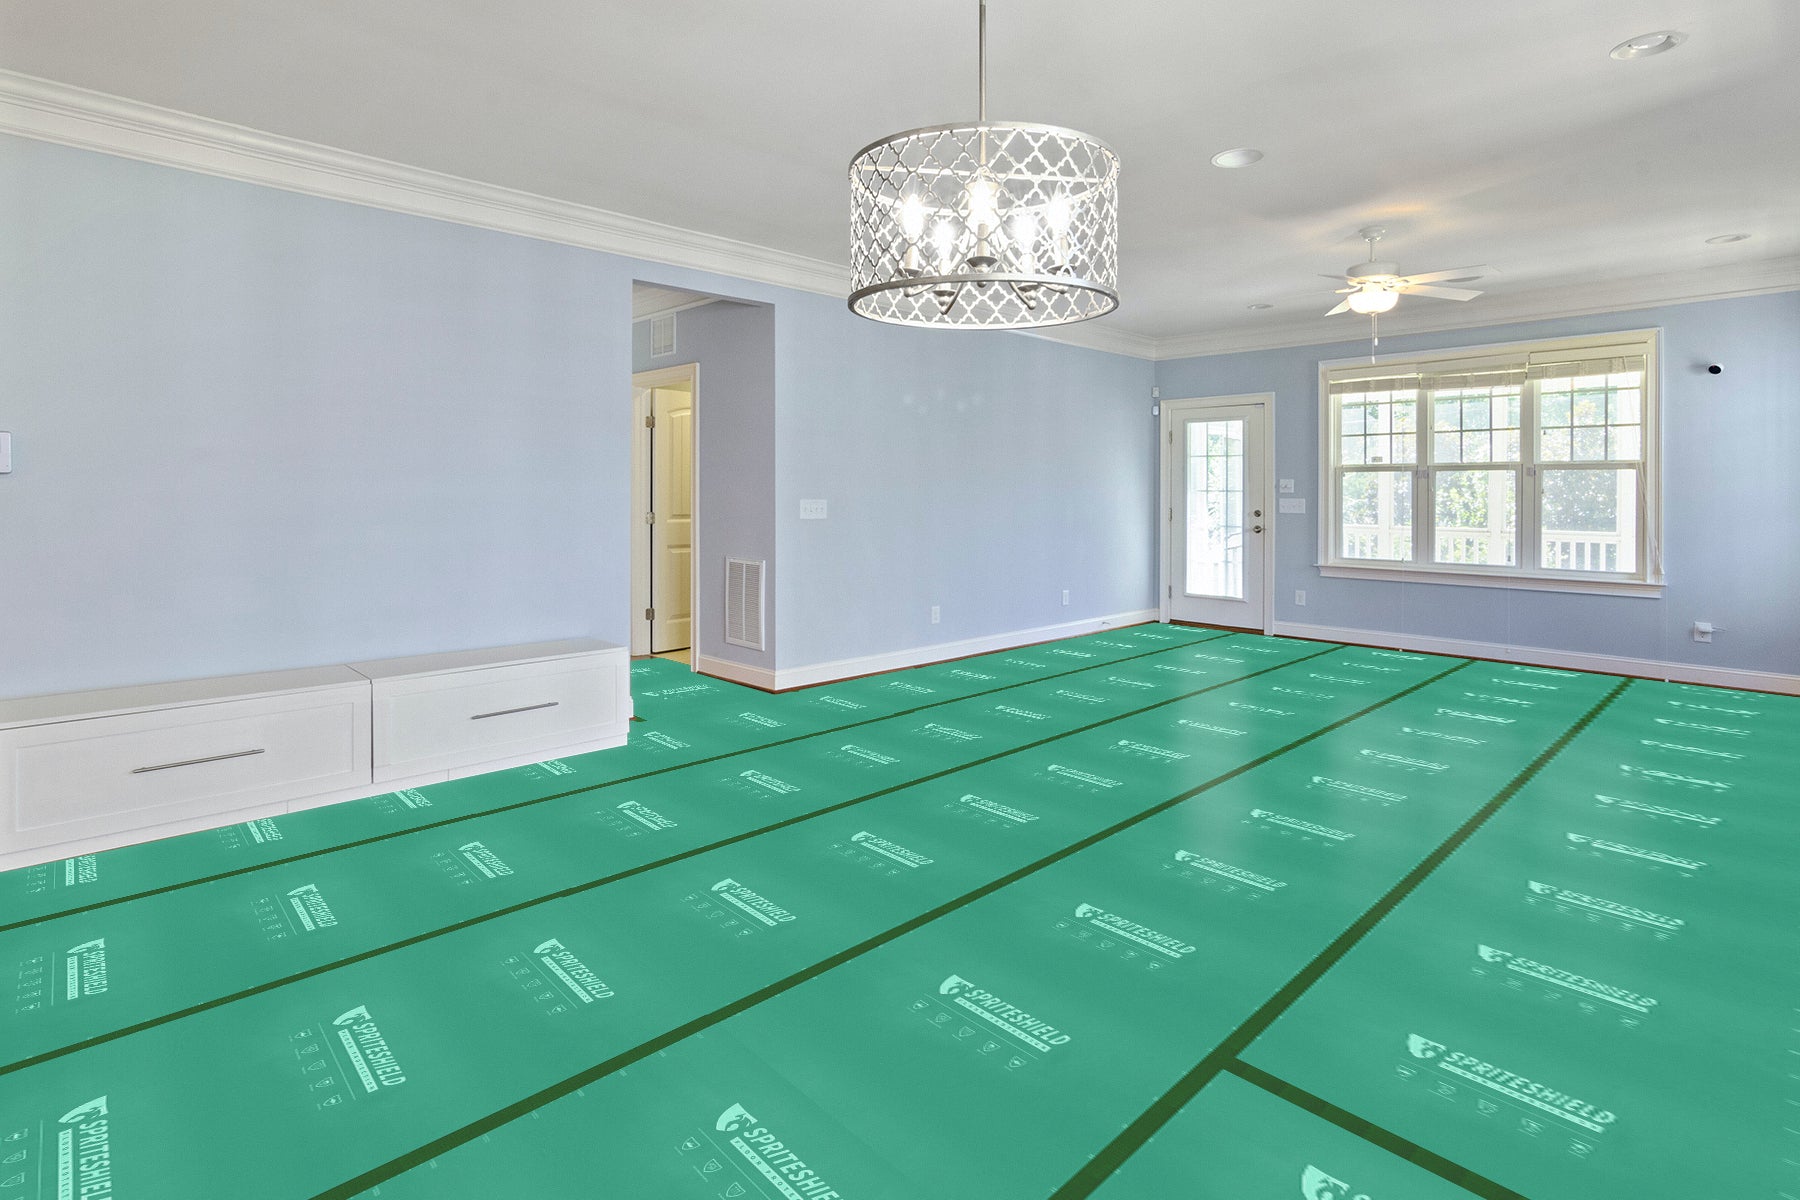 What to Put on Floors to Protect during Construction?